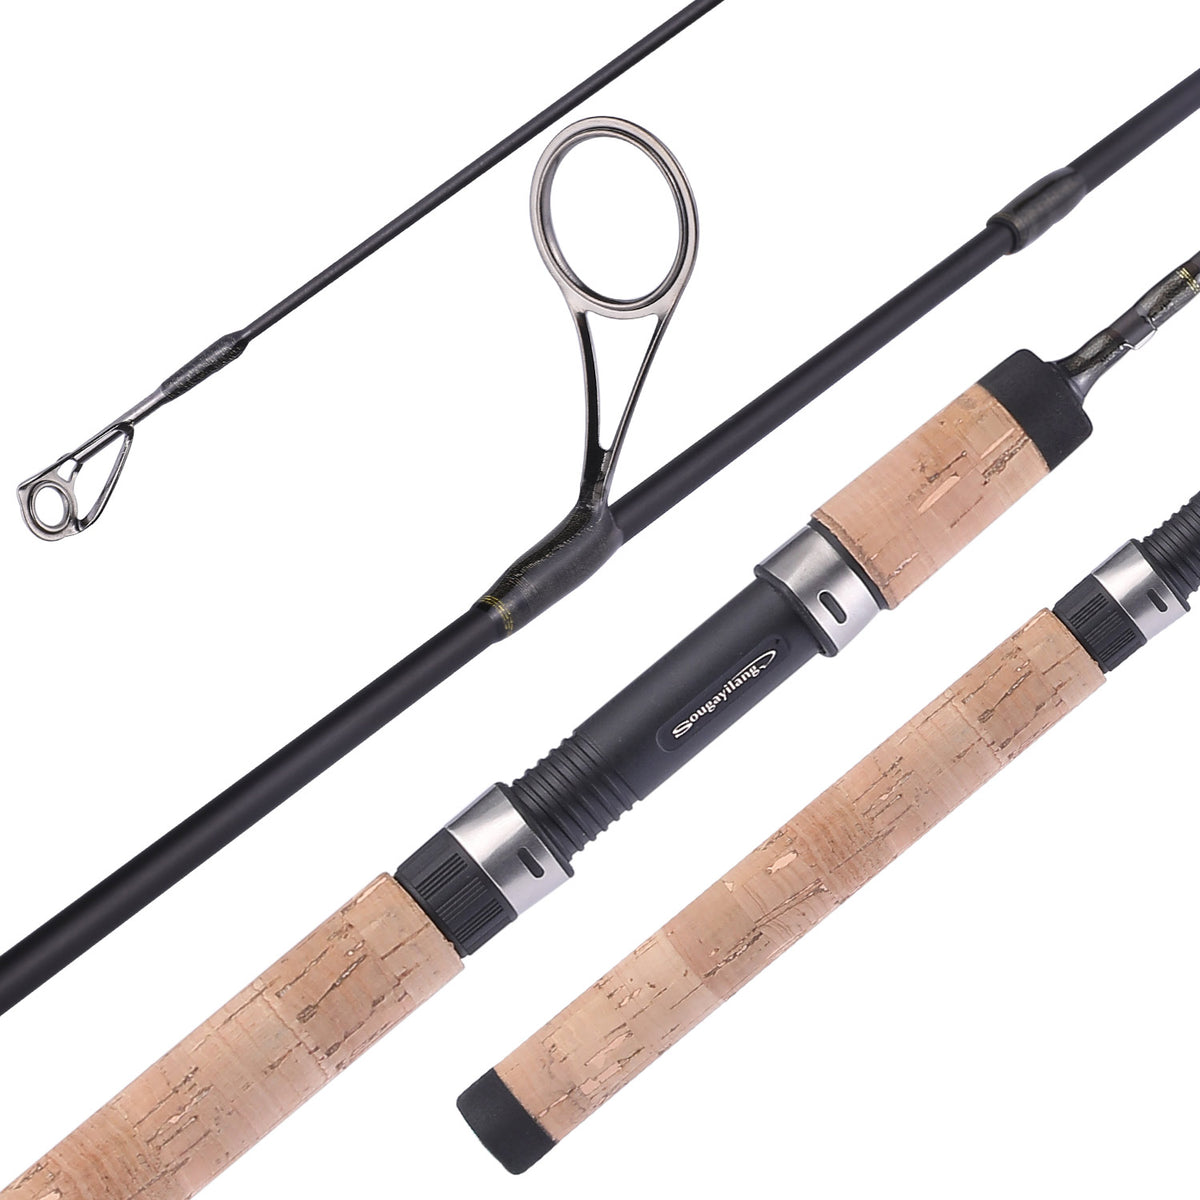 Trout Rods, Spinning/Casting Rod, Ultralight Fishing Rod, Graphite  Lightweight 2